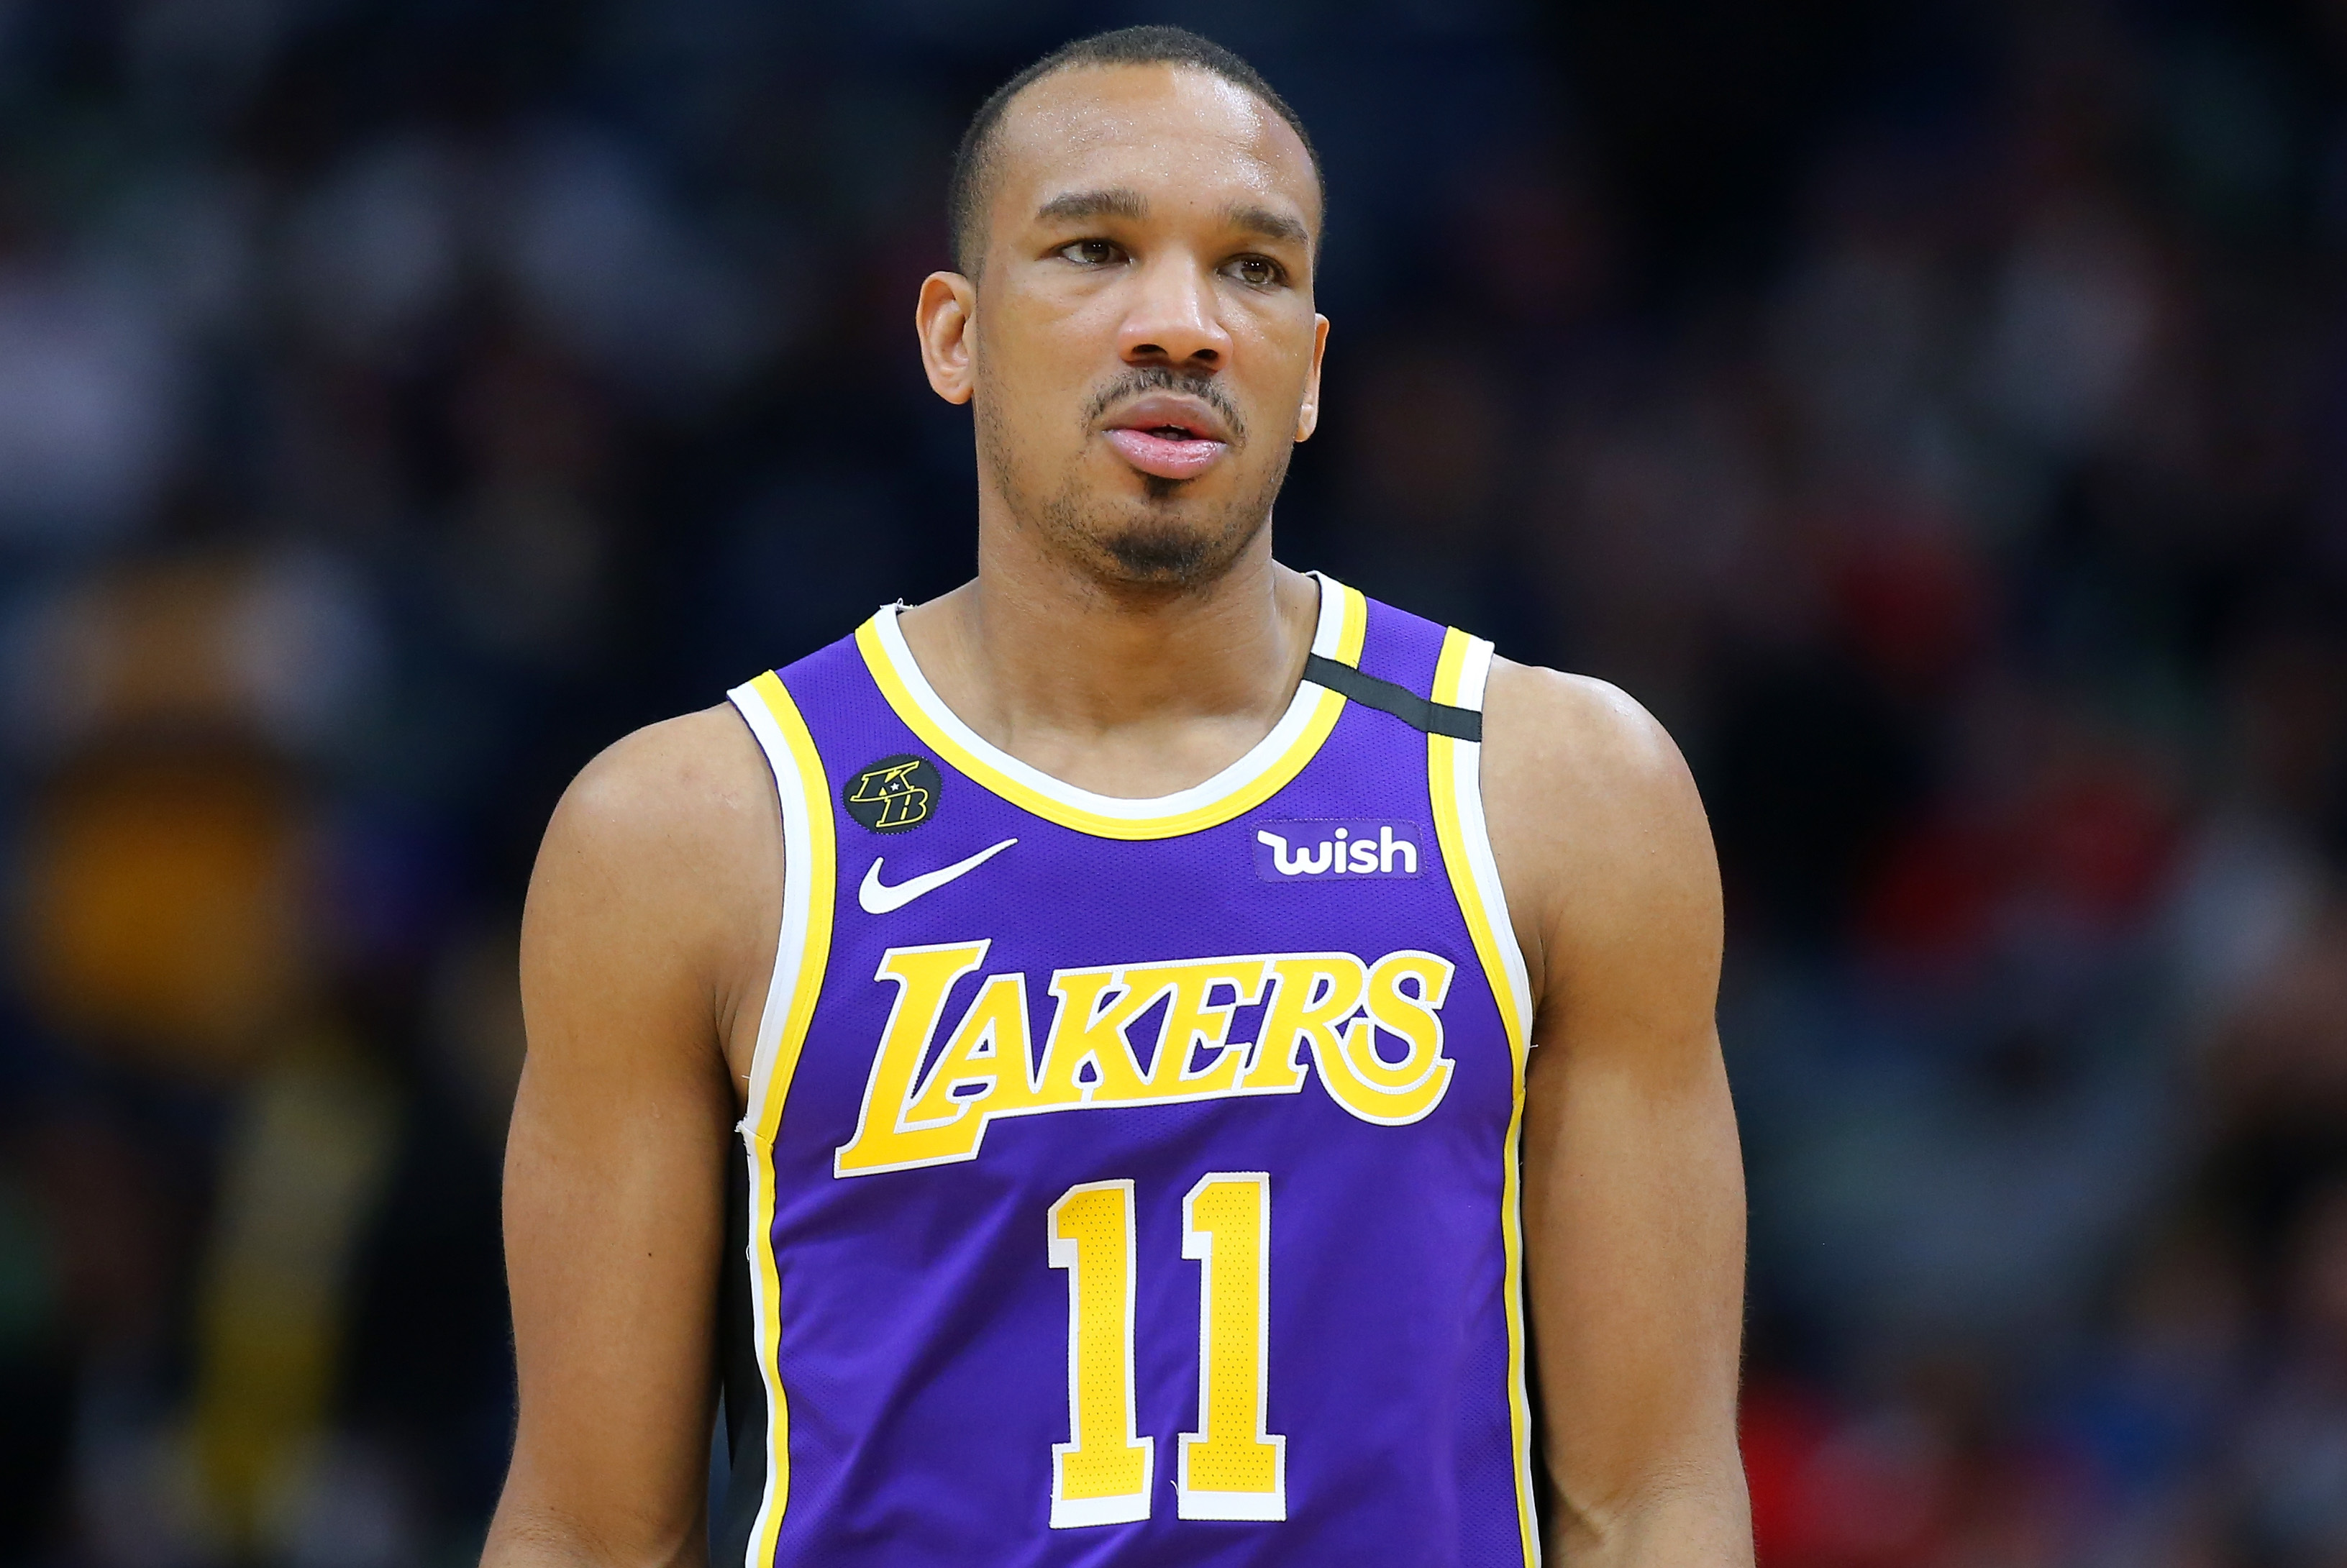 Lakers Injury Report: Avery Bradley gets MRI out vs. Kings with